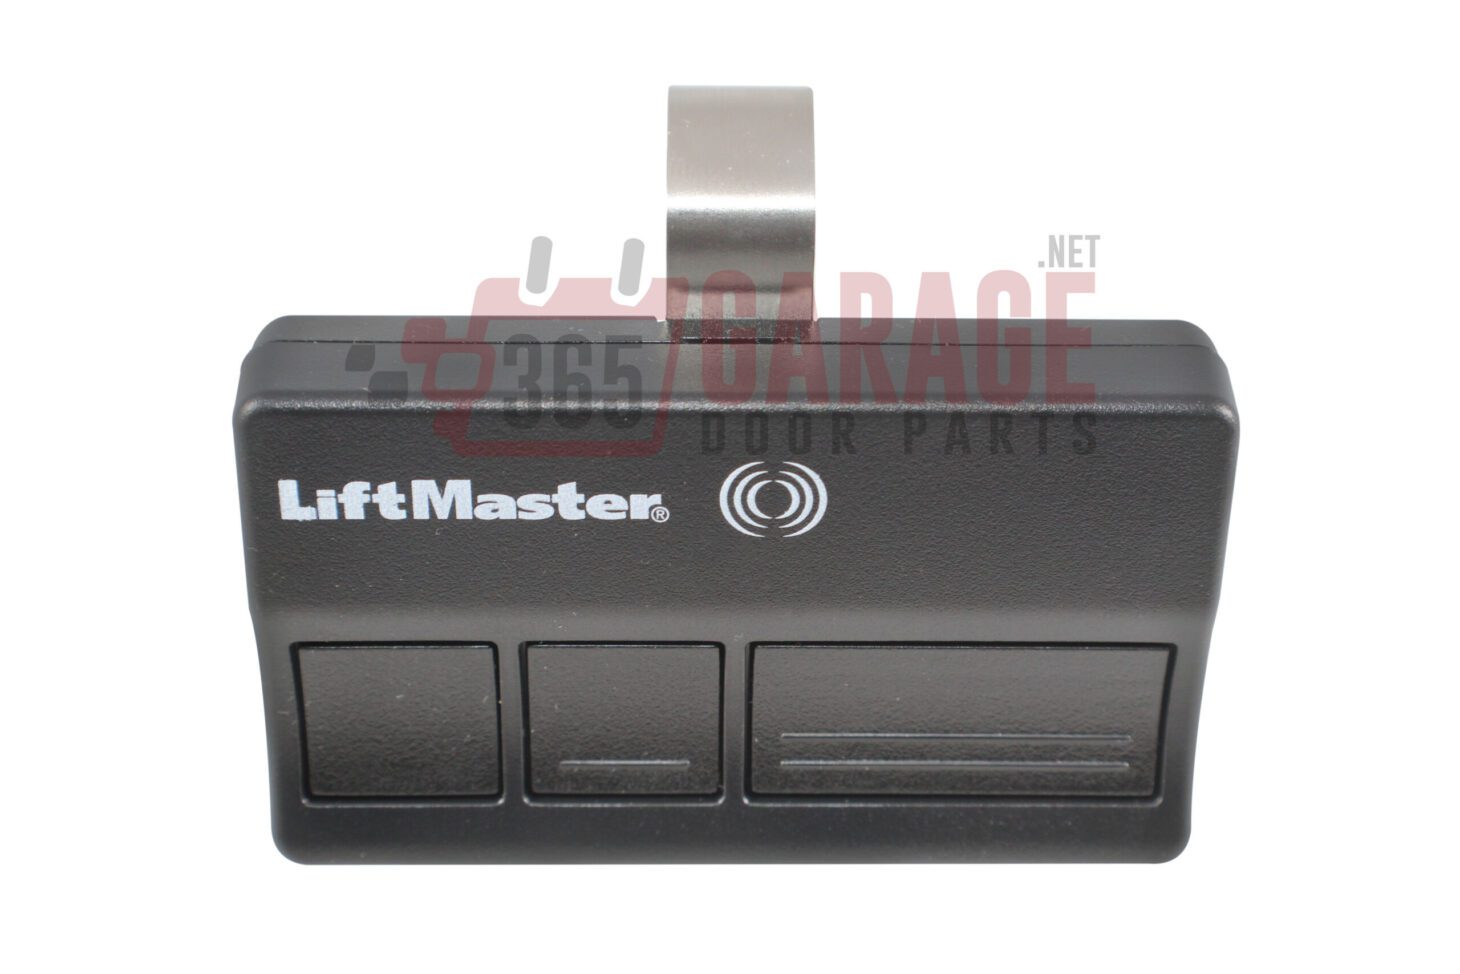 Liftmaster 373LM Security+ 3 Button Garage Door Opener Remote Control ... - 373lm 2  2 ScaleD